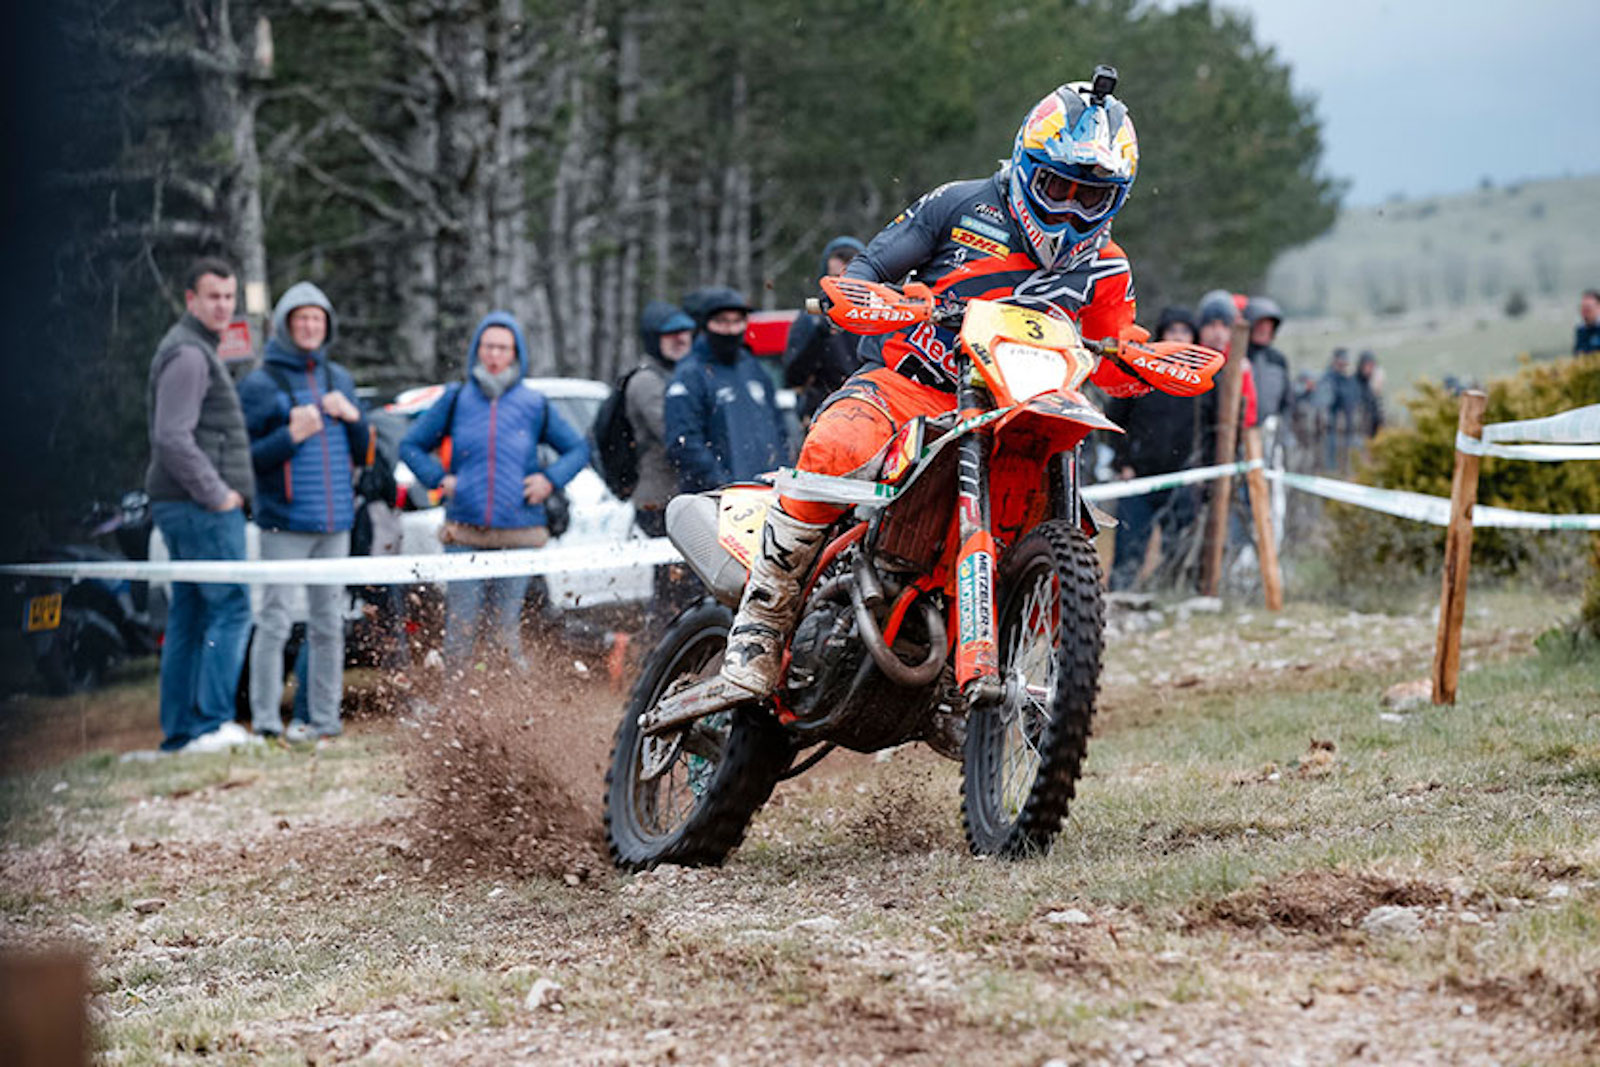 BR2 Enduro Solsona – Round 7 of the WESS race details revealed 